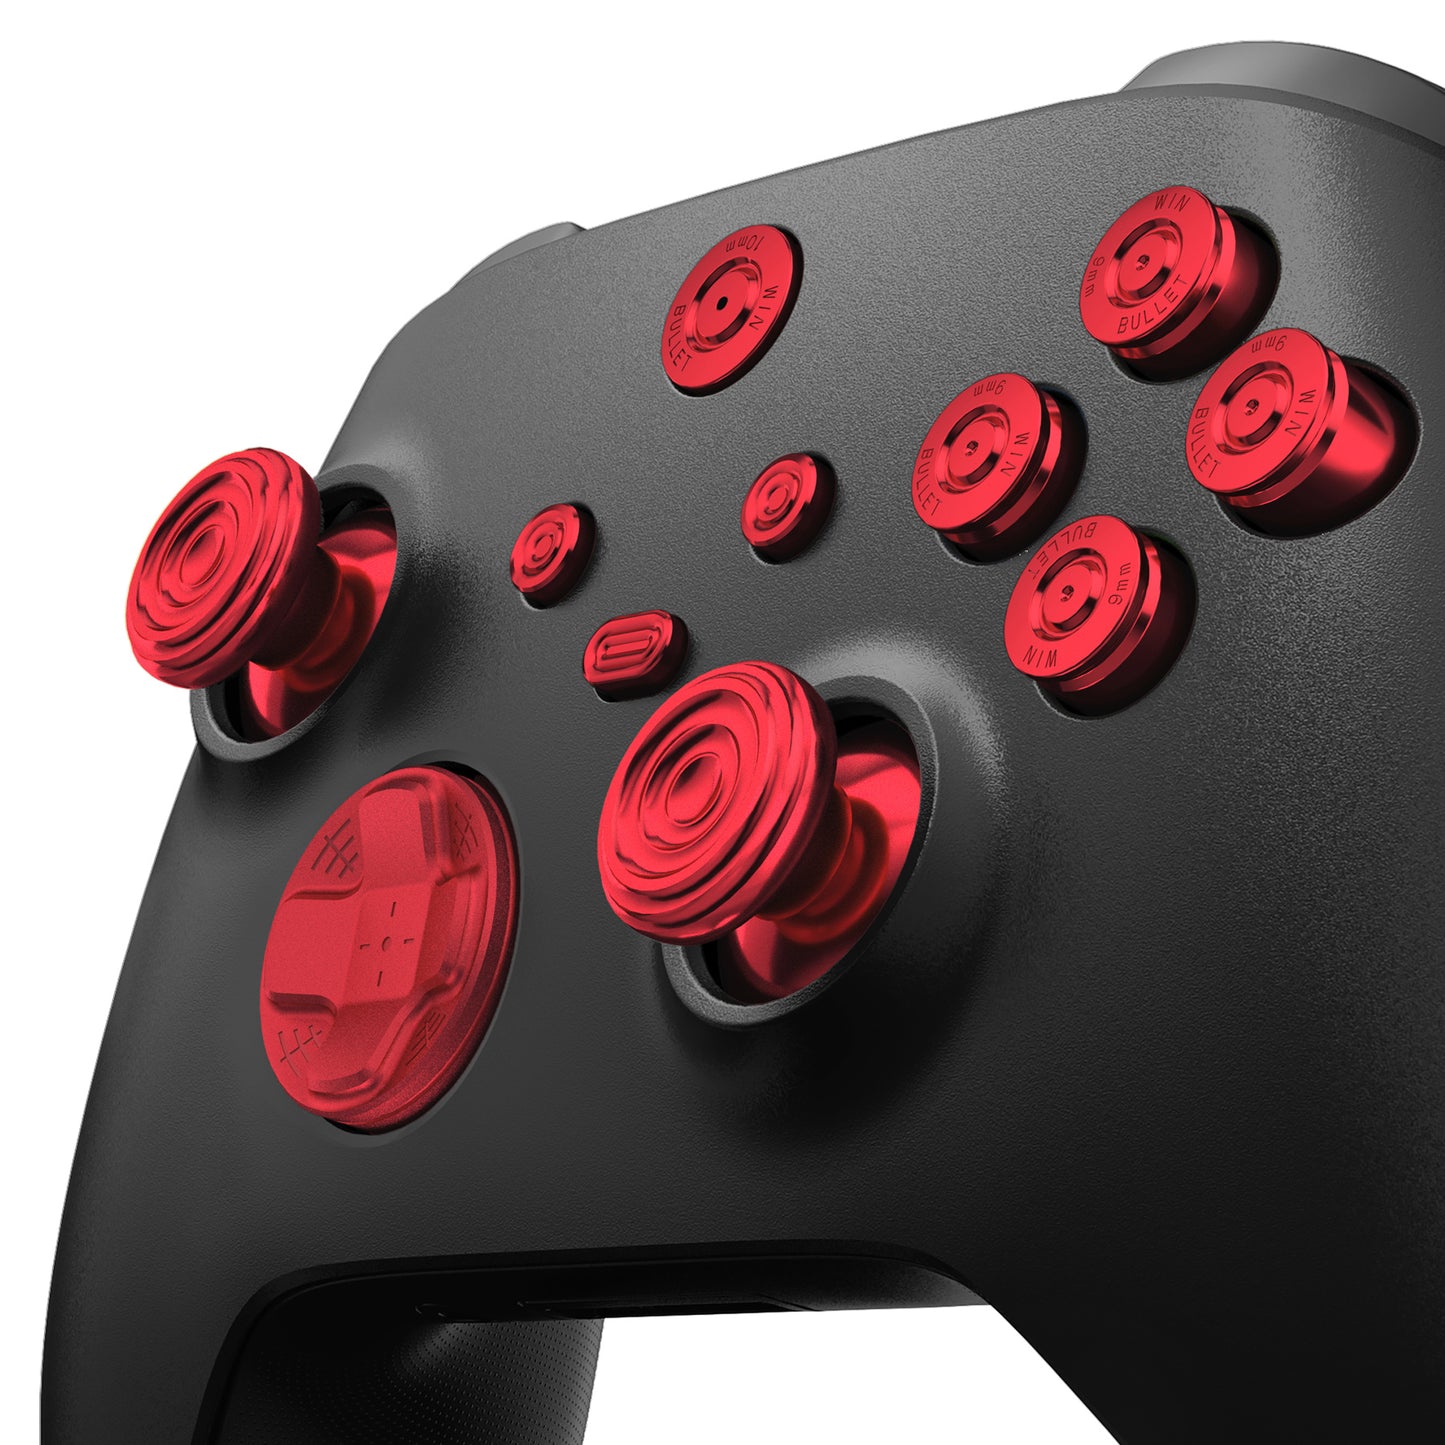 eXtremeRate Retail eXtremeRate 11 in 1 Custom Red Metal Buttons for Xbox Series X/S Controller, Aluminum Alloy Dpad Start Back Share Button, Replacement Thumbsticks, Home ABXY Bullet Buttons for Xbox Core Controller - JX3E003